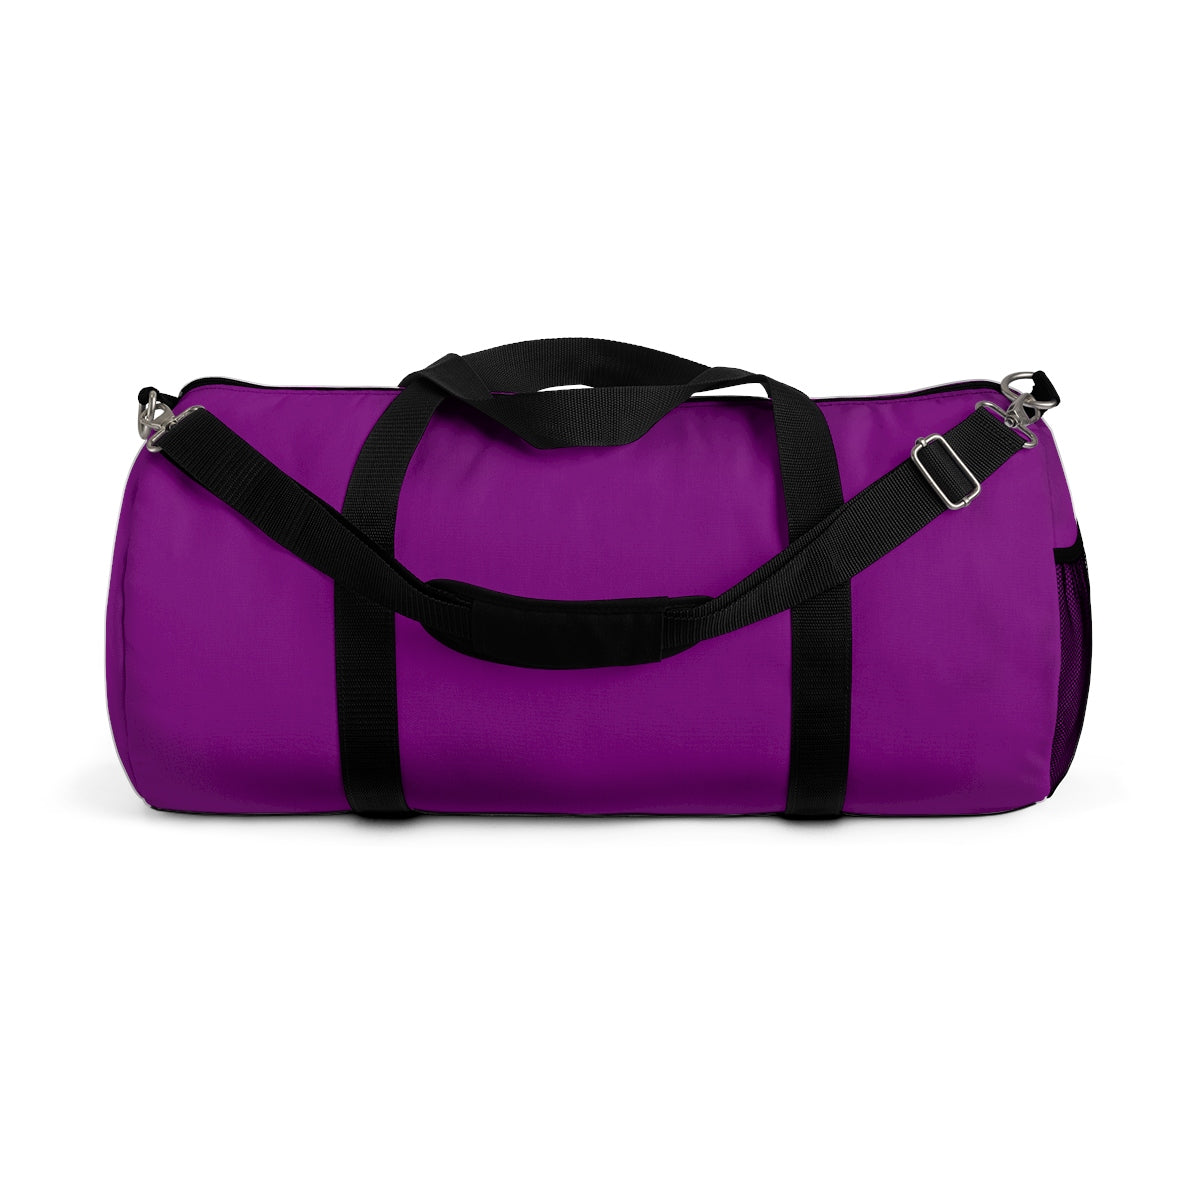 Royal Purple Solid Color All Day Small Or Large Size Duffel Bag, Made in USA-Duffel Bag-Small-Heidi Kimura Art LLC